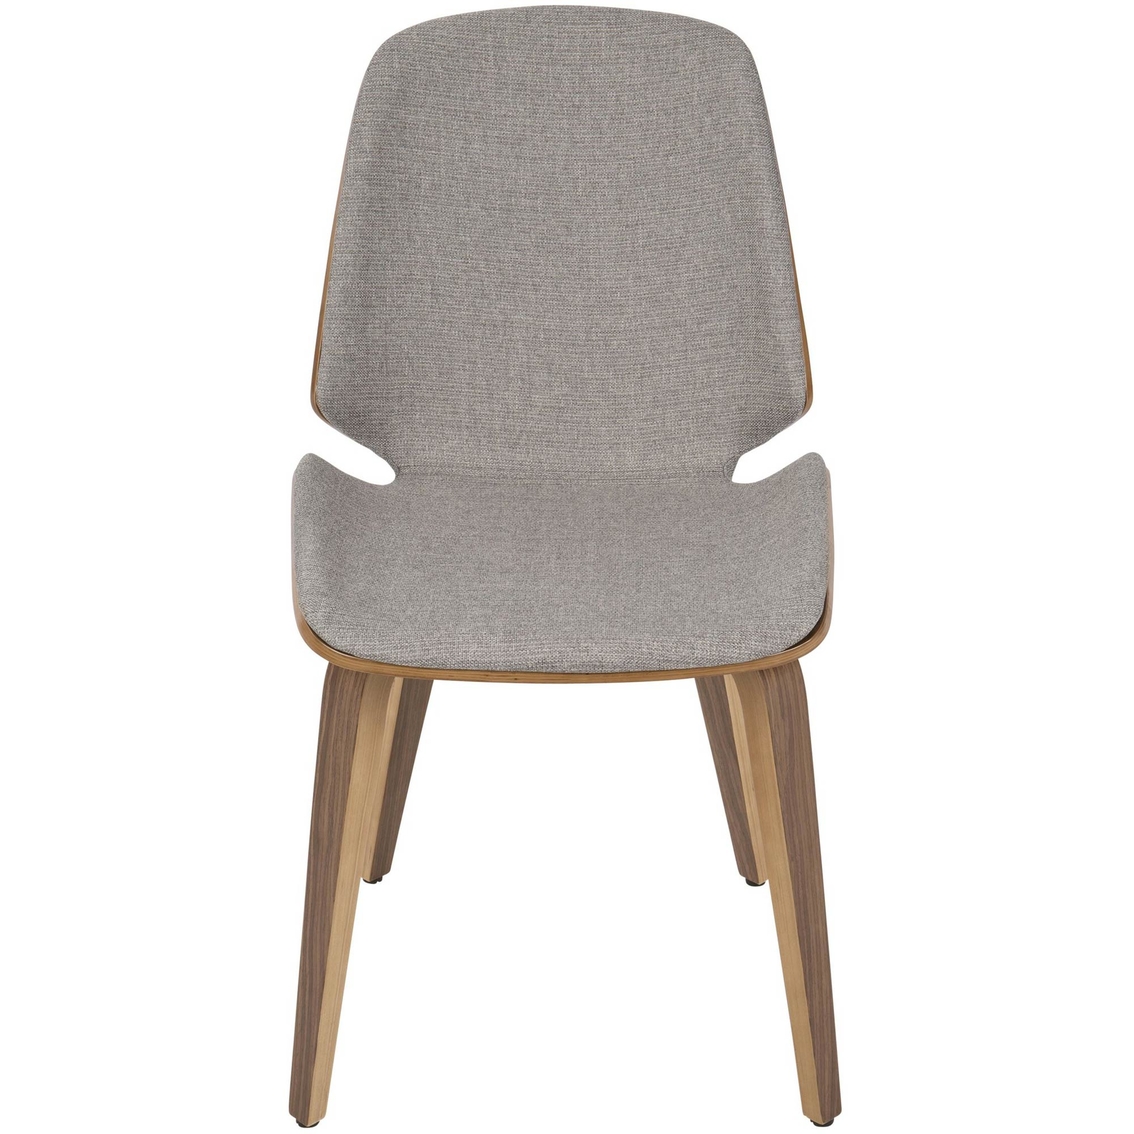 LumiSource Serena Dining Chair 2 pk. - Image 3 of 8